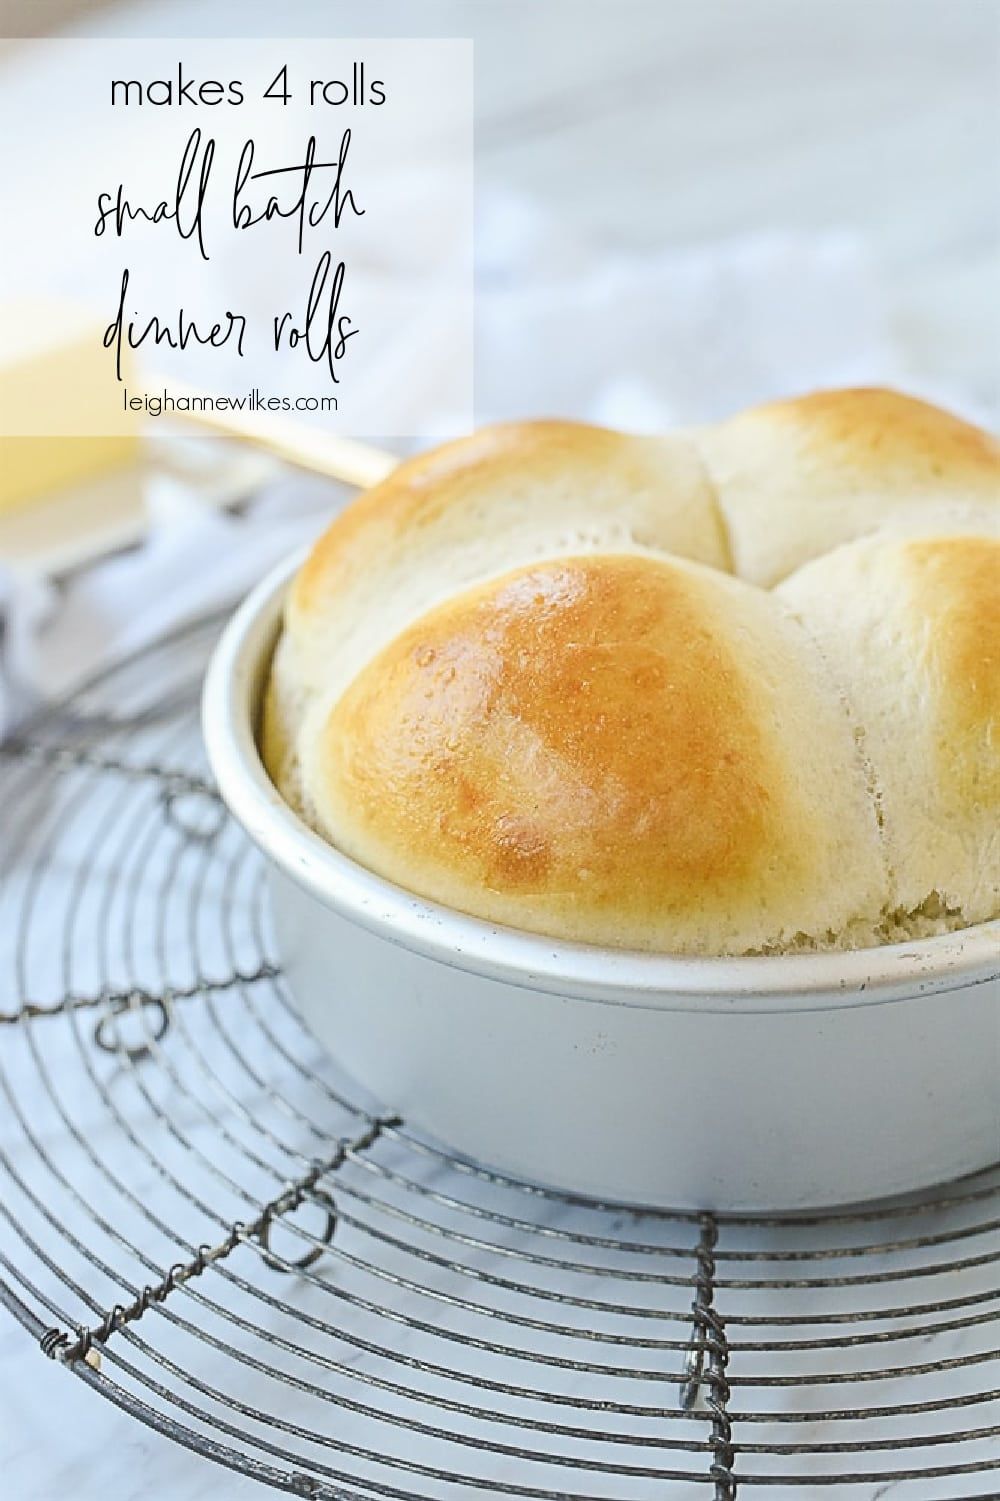 Small Batch Dinner Roll Recipe - only makes 4 rolls!